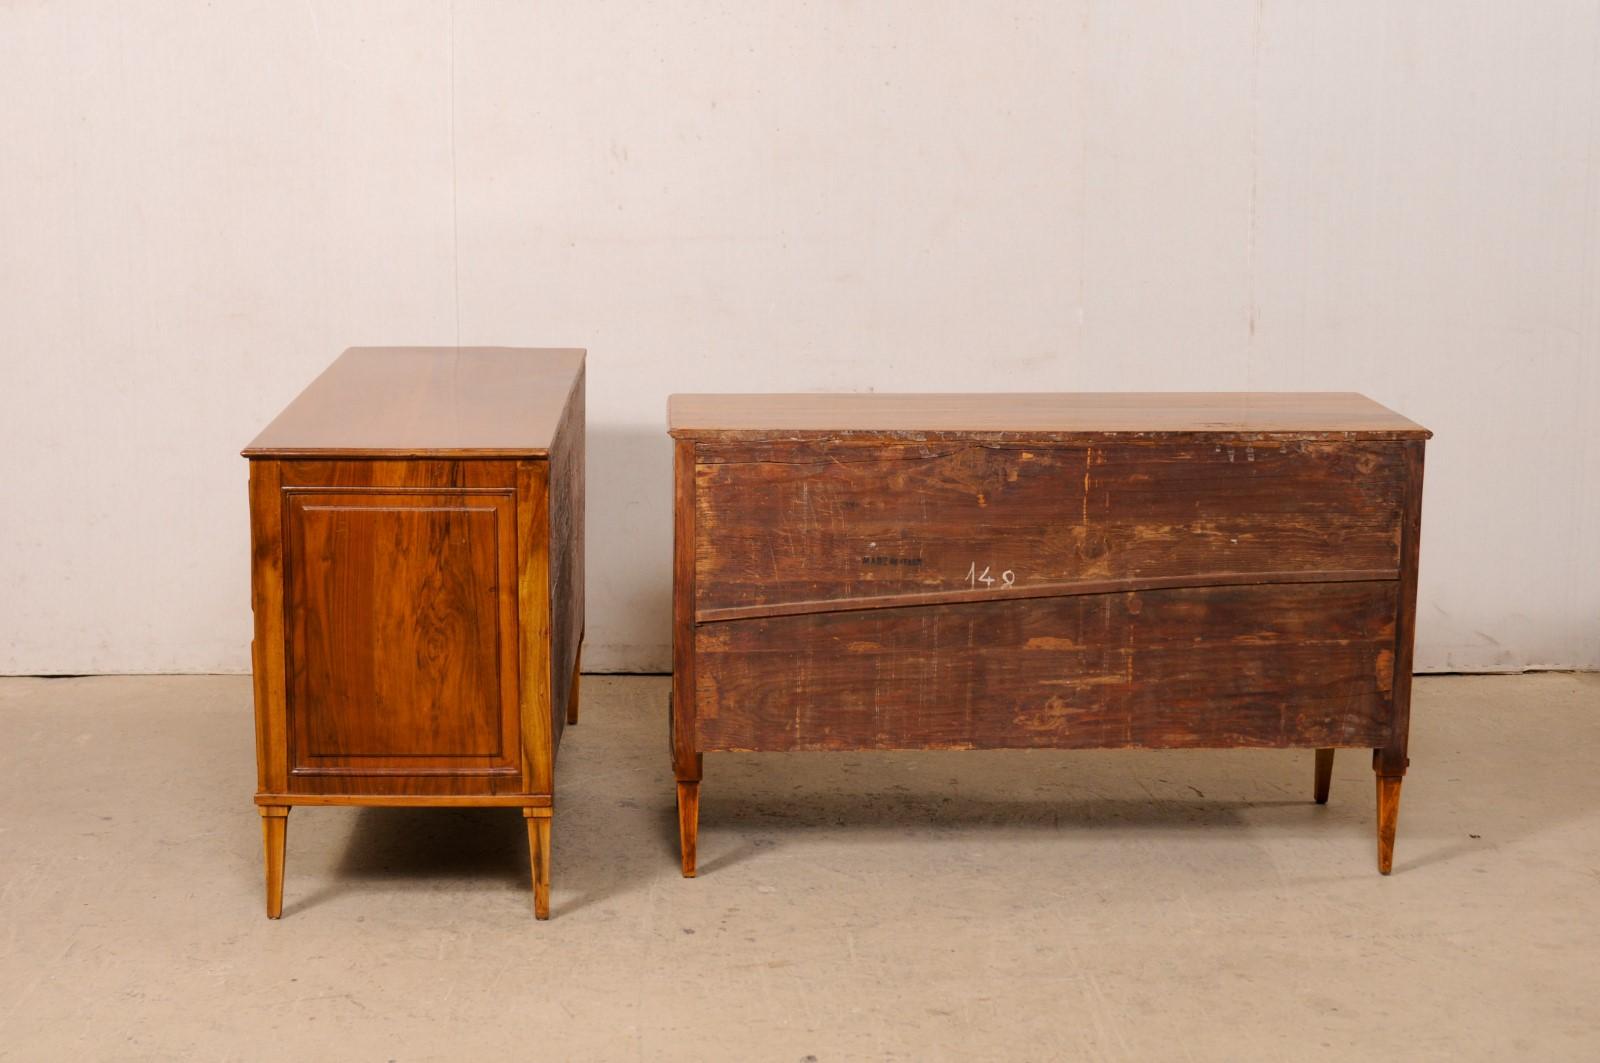 A Fabulous Pair of Italian Late 18th C. Two-Drawer Cassetteire, Over 4 Ft. Long For Sale 4